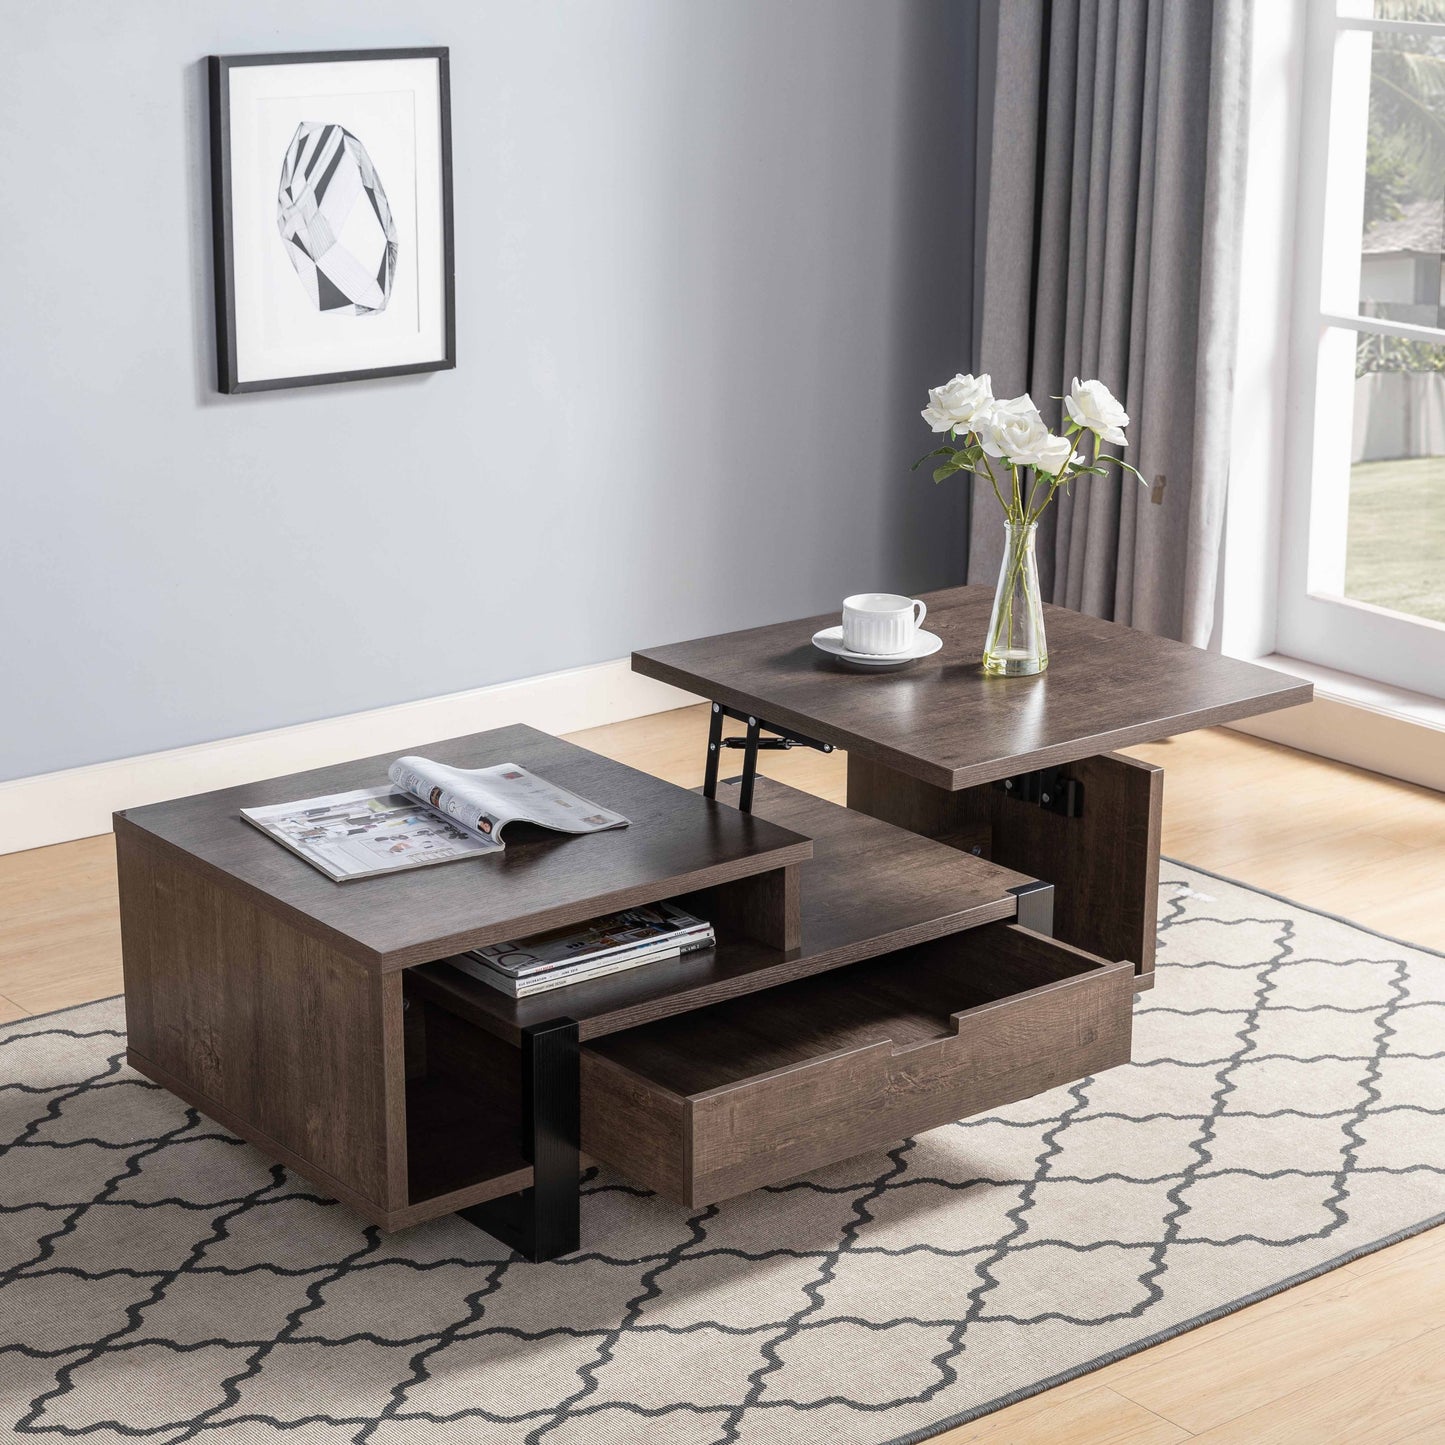 Walnut Oak & Black Coffee Table with Lift Top and Drawer Storage